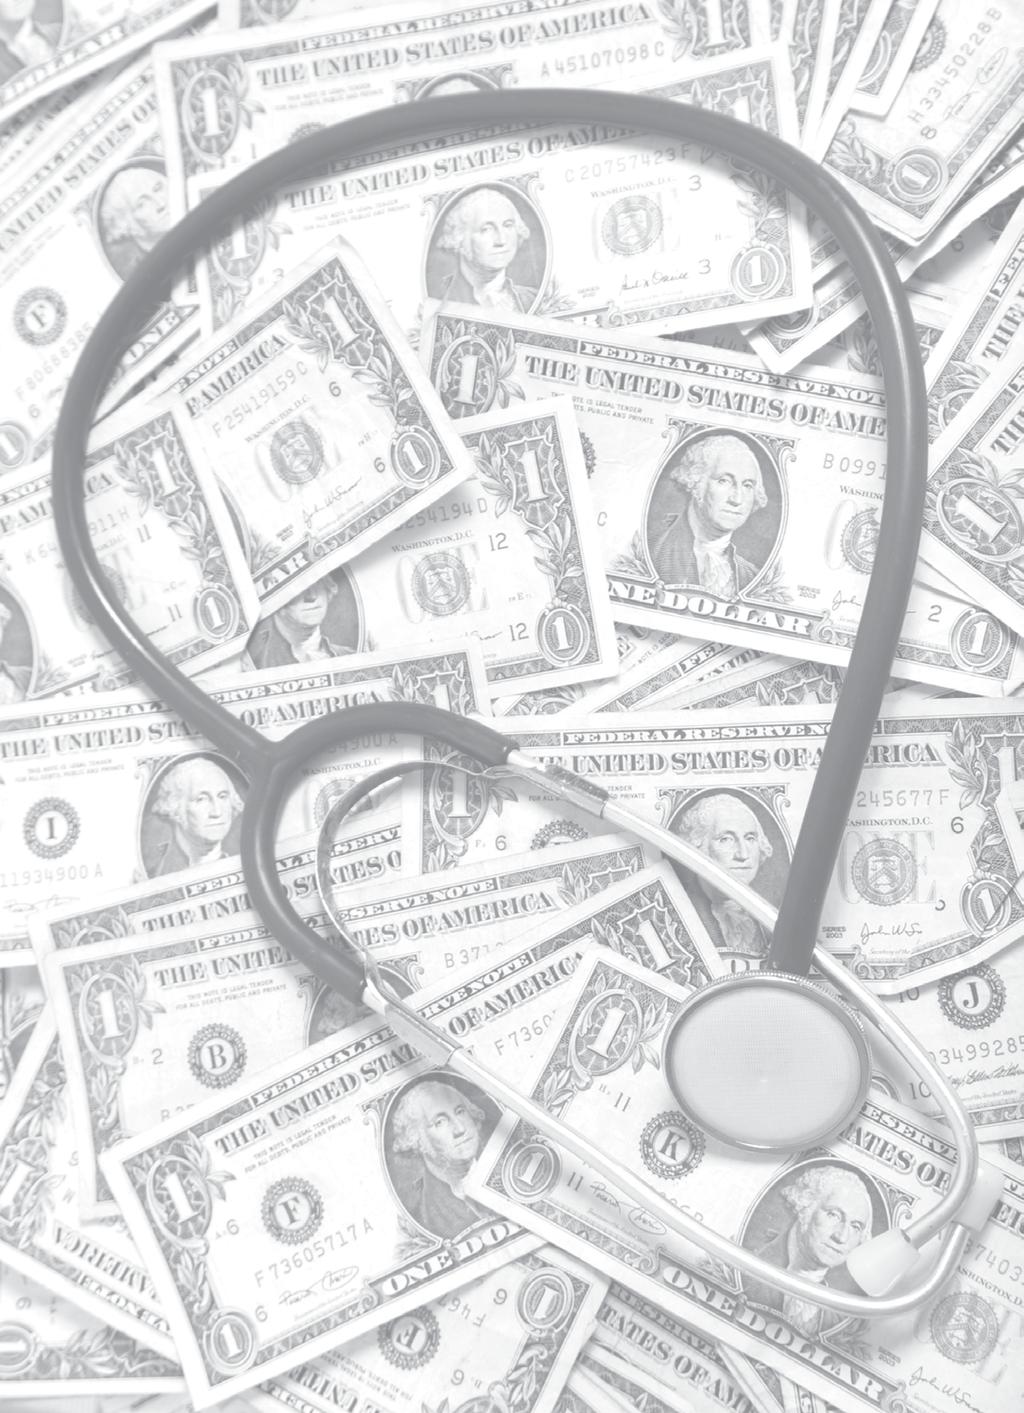 Self-pay patients: Quarterly benchmarking report